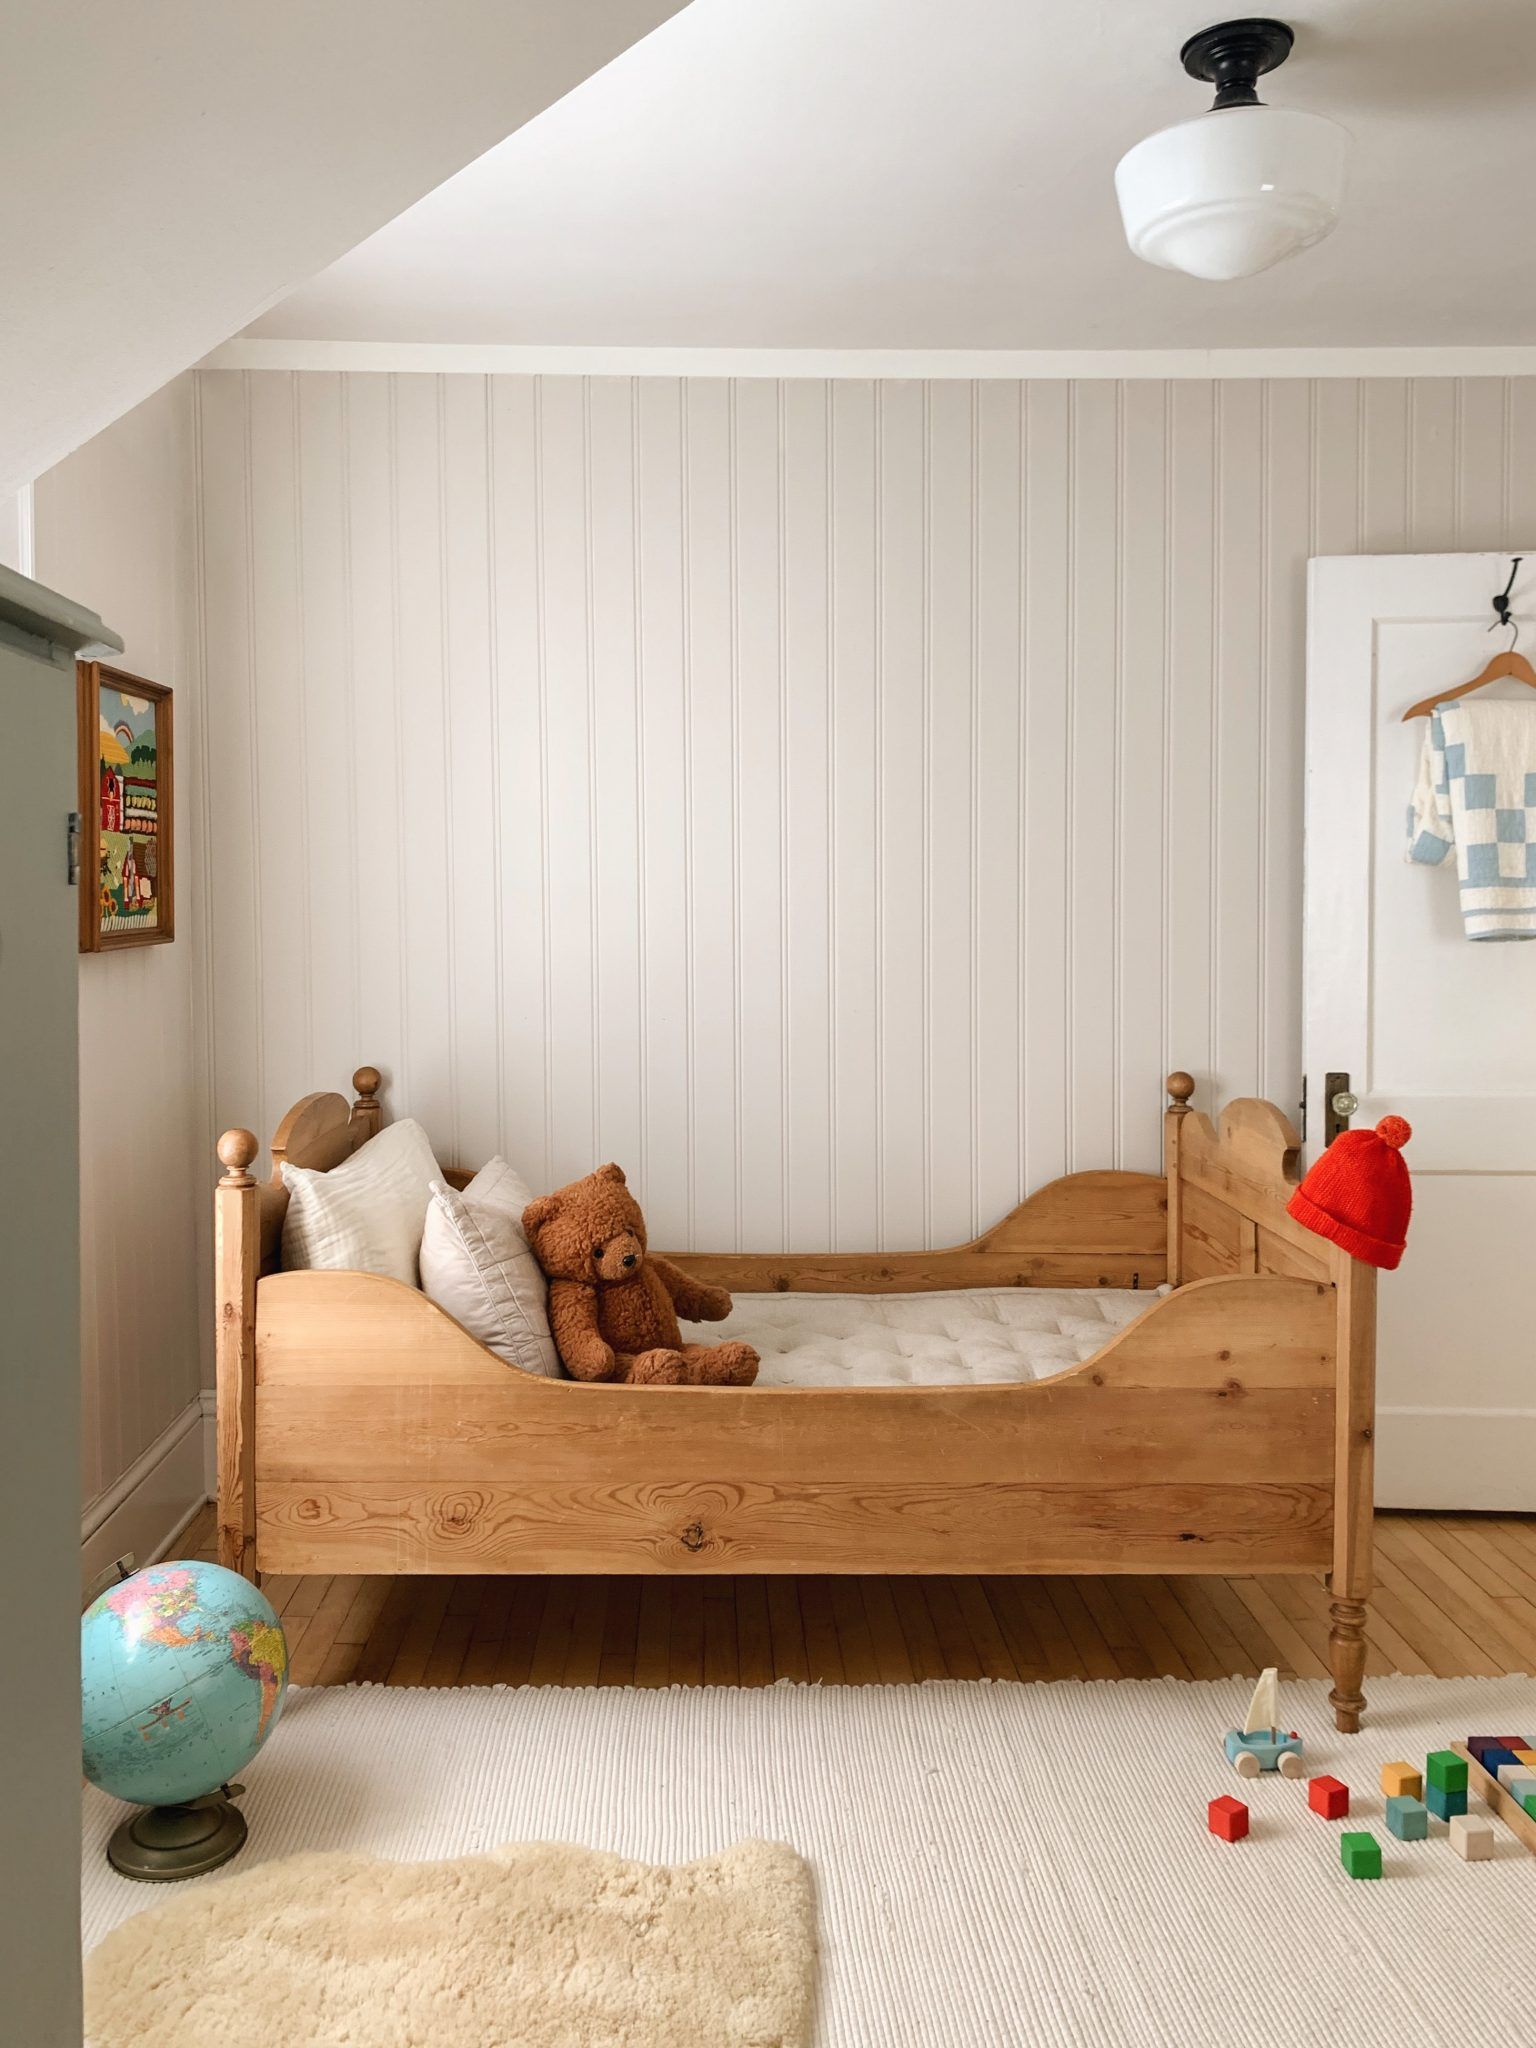 Transitioning to a Toddler Bed: Tips and
Advice